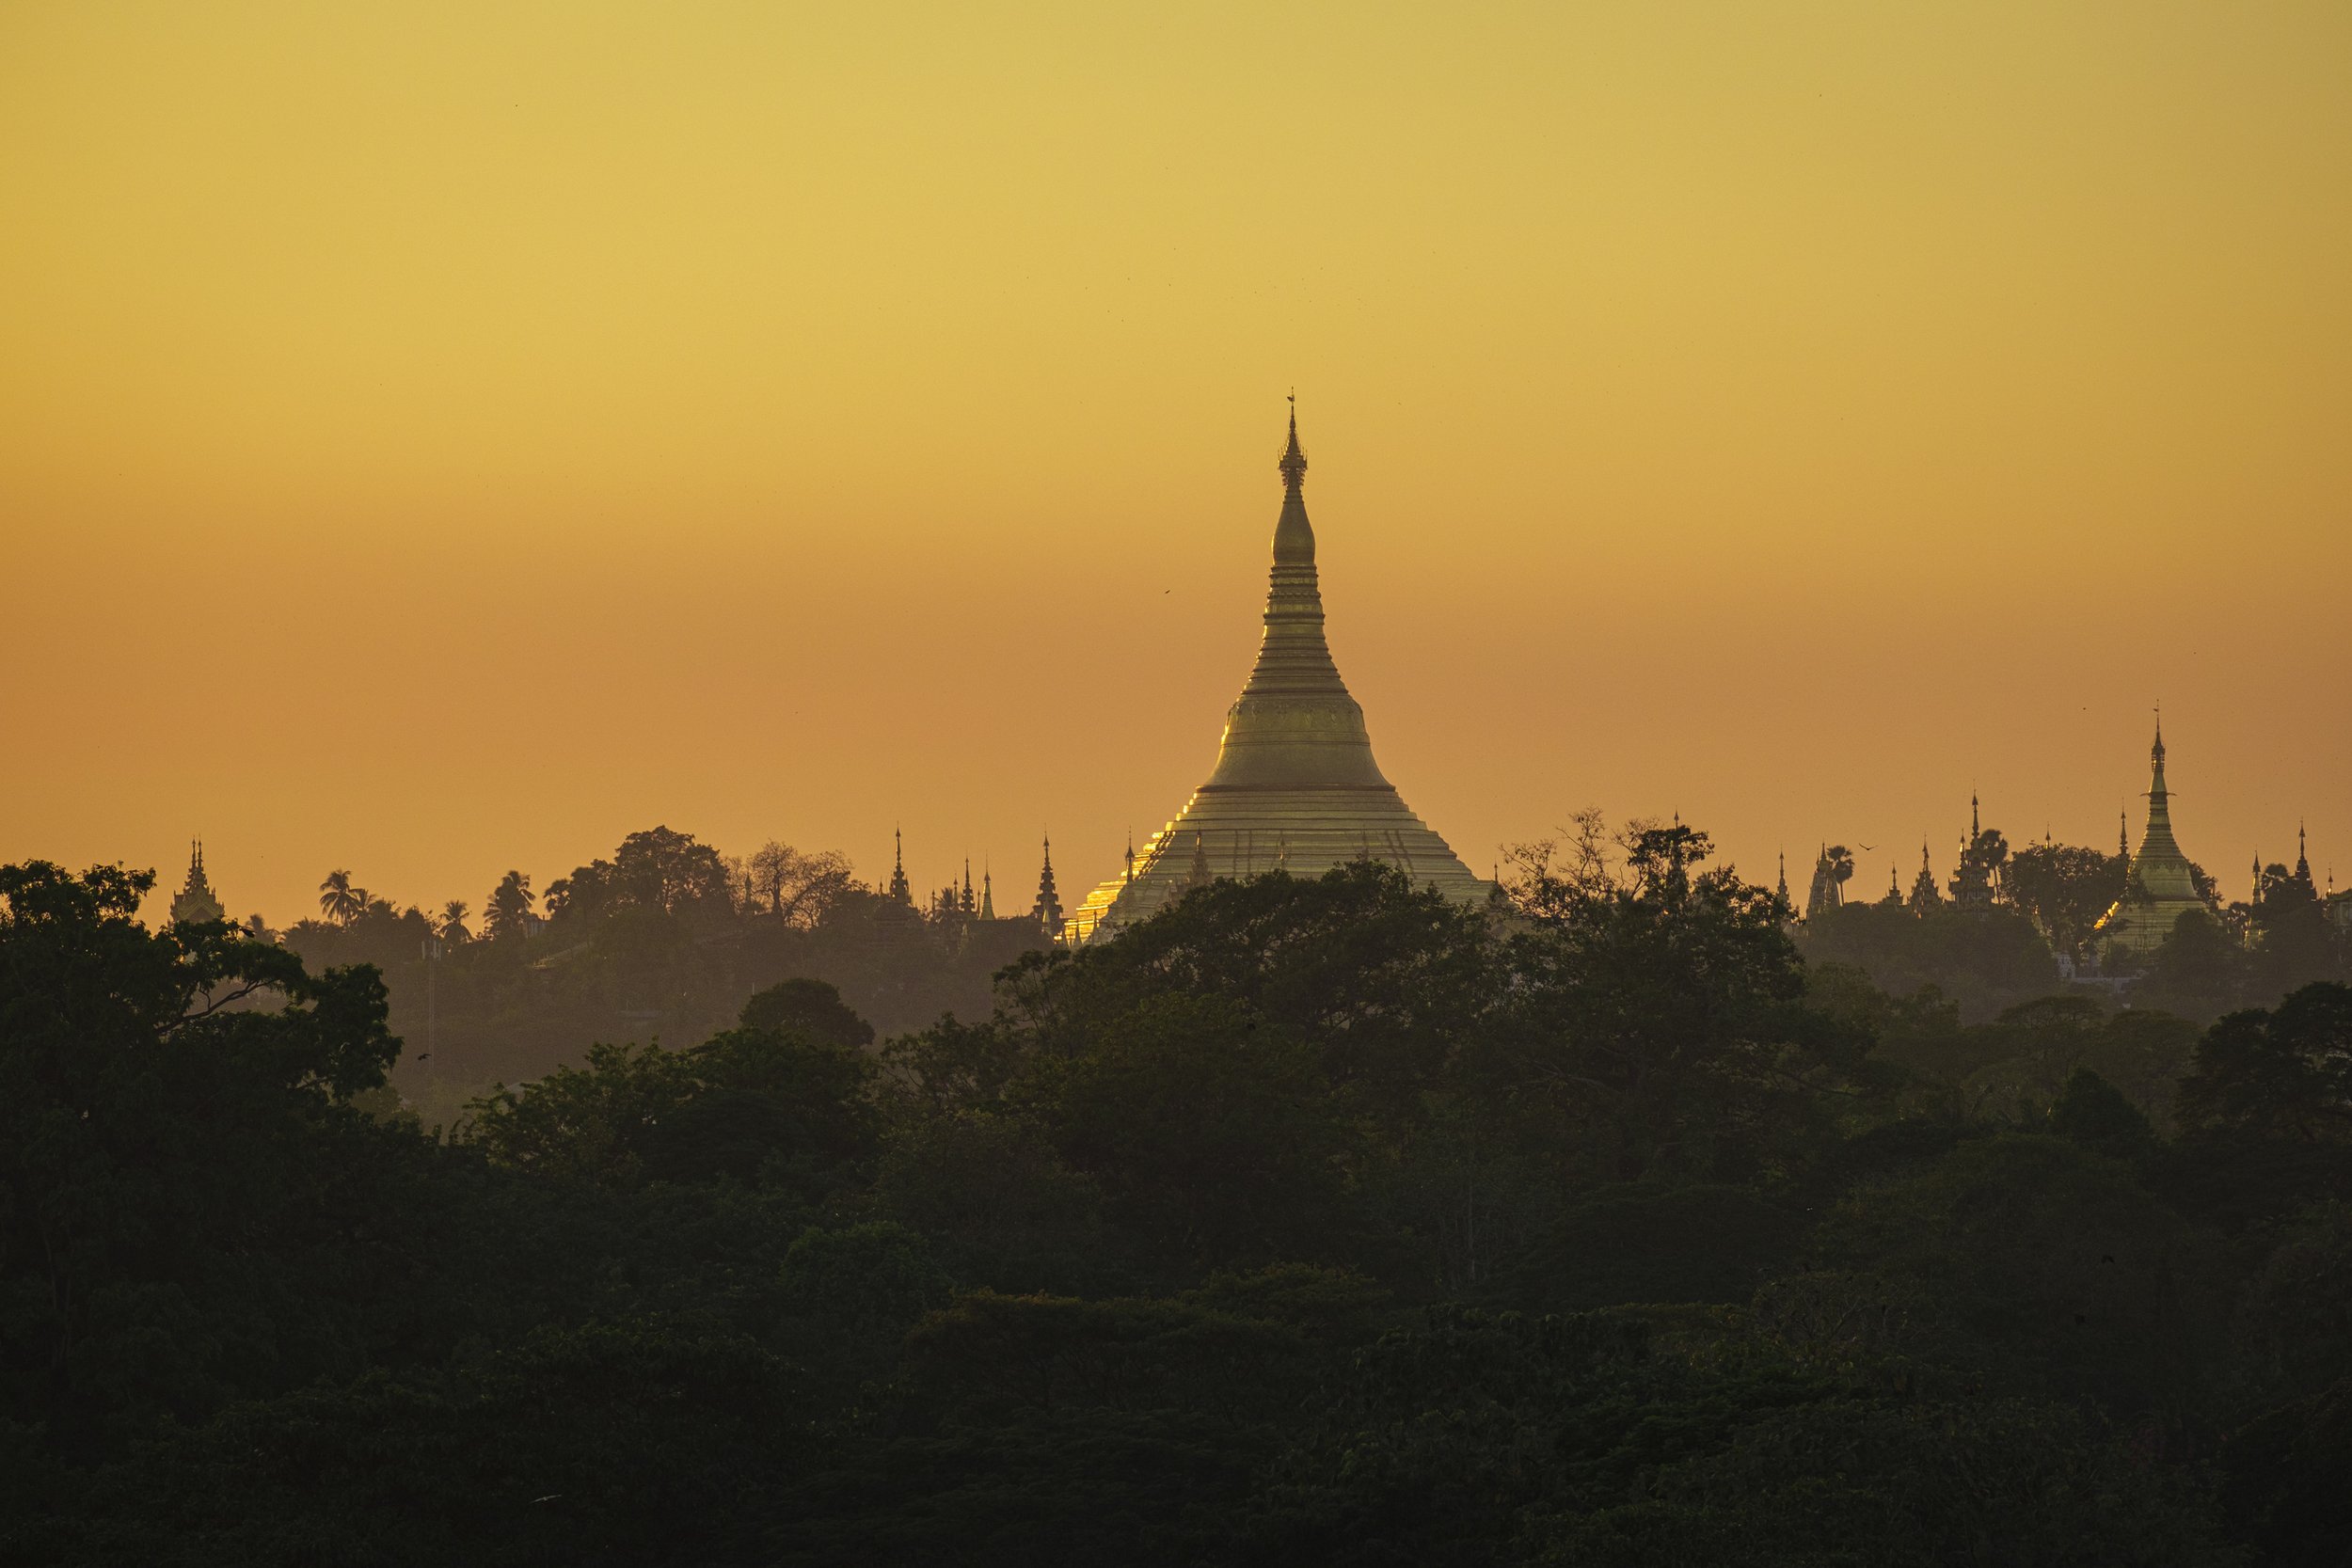  The Shwedagon Pagoda in the evening sun gives the impression that calm and peace exists in Yangon. But this appearance is deceptive. 